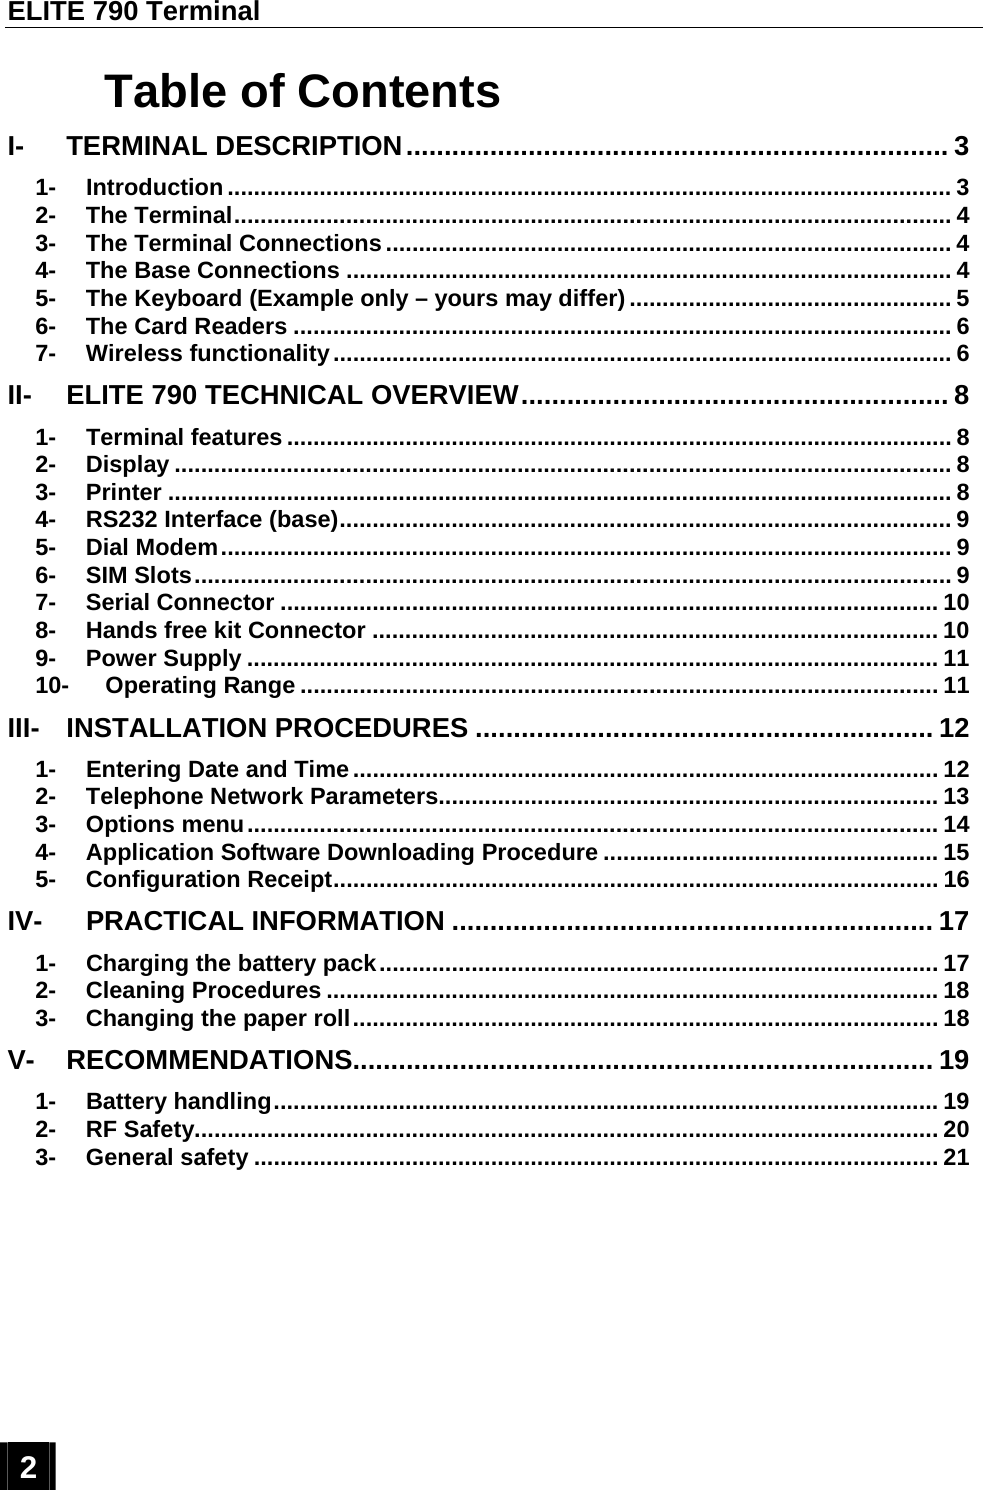 ELITE 790 Terminal  2  Table of Contents I- TERMINAL DESCRIPTION....................................................................... 3 1- Introduction .............................................................................................................. 3 2- The Terminal............................................................................................................. 4 3- The Terminal Connections...................................................................................... 4 4- The Base Connections ............................................................................................ 4 5- The Keyboard (Example only – yours may differ) ................................................. 5 6- The Card Readers .................................................................................................... 6 7- Wireless functionality.............................................................................................. 6 II- ELITE 790 TECHNICAL OVERVIEW........................................................ 8 1- Terminal features ..................................................................................................... 8 2- Display ...................................................................................................................... 8 3- Printer ....................................................................................................................... 8 4- RS232 Interface (base)............................................................................................. 9 5- Dial Modem............................................................................................................... 9 6- SIM Slots................................................................................................................... 9 7- Serial Connector .................................................................................................... 10 8- Hands free kit Connector ...................................................................................... 10 9- Power Supply ......................................................................................................... 11 10- Operating Range ................................................................................................. 11 III- INSTALLATION PROCEDURES ............................................................ 12 1- Entering Date and Time......................................................................................... 12 2- Telephone Network Parameters............................................................................ 13 3- Options menu......................................................................................................... 14 4- Application Software Downloading Procedure ................................................... 15 5- Configuration Receipt............................................................................................ 16 IV- PRACTICAL INFORMATION ............................................................... 17 1- Charging the battery pack..................................................................................... 17 2- Cleaning Procedures ............................................................................................. 18 3- Changing the paper roll......................................................................................... 18 V- RECOMMENDATIONS............................................................................ 19 1- Battery handling..................................................................................................... 19 2- RF Safety................................................................................................................. 20 3- General safety ........................................................................................................ 21  